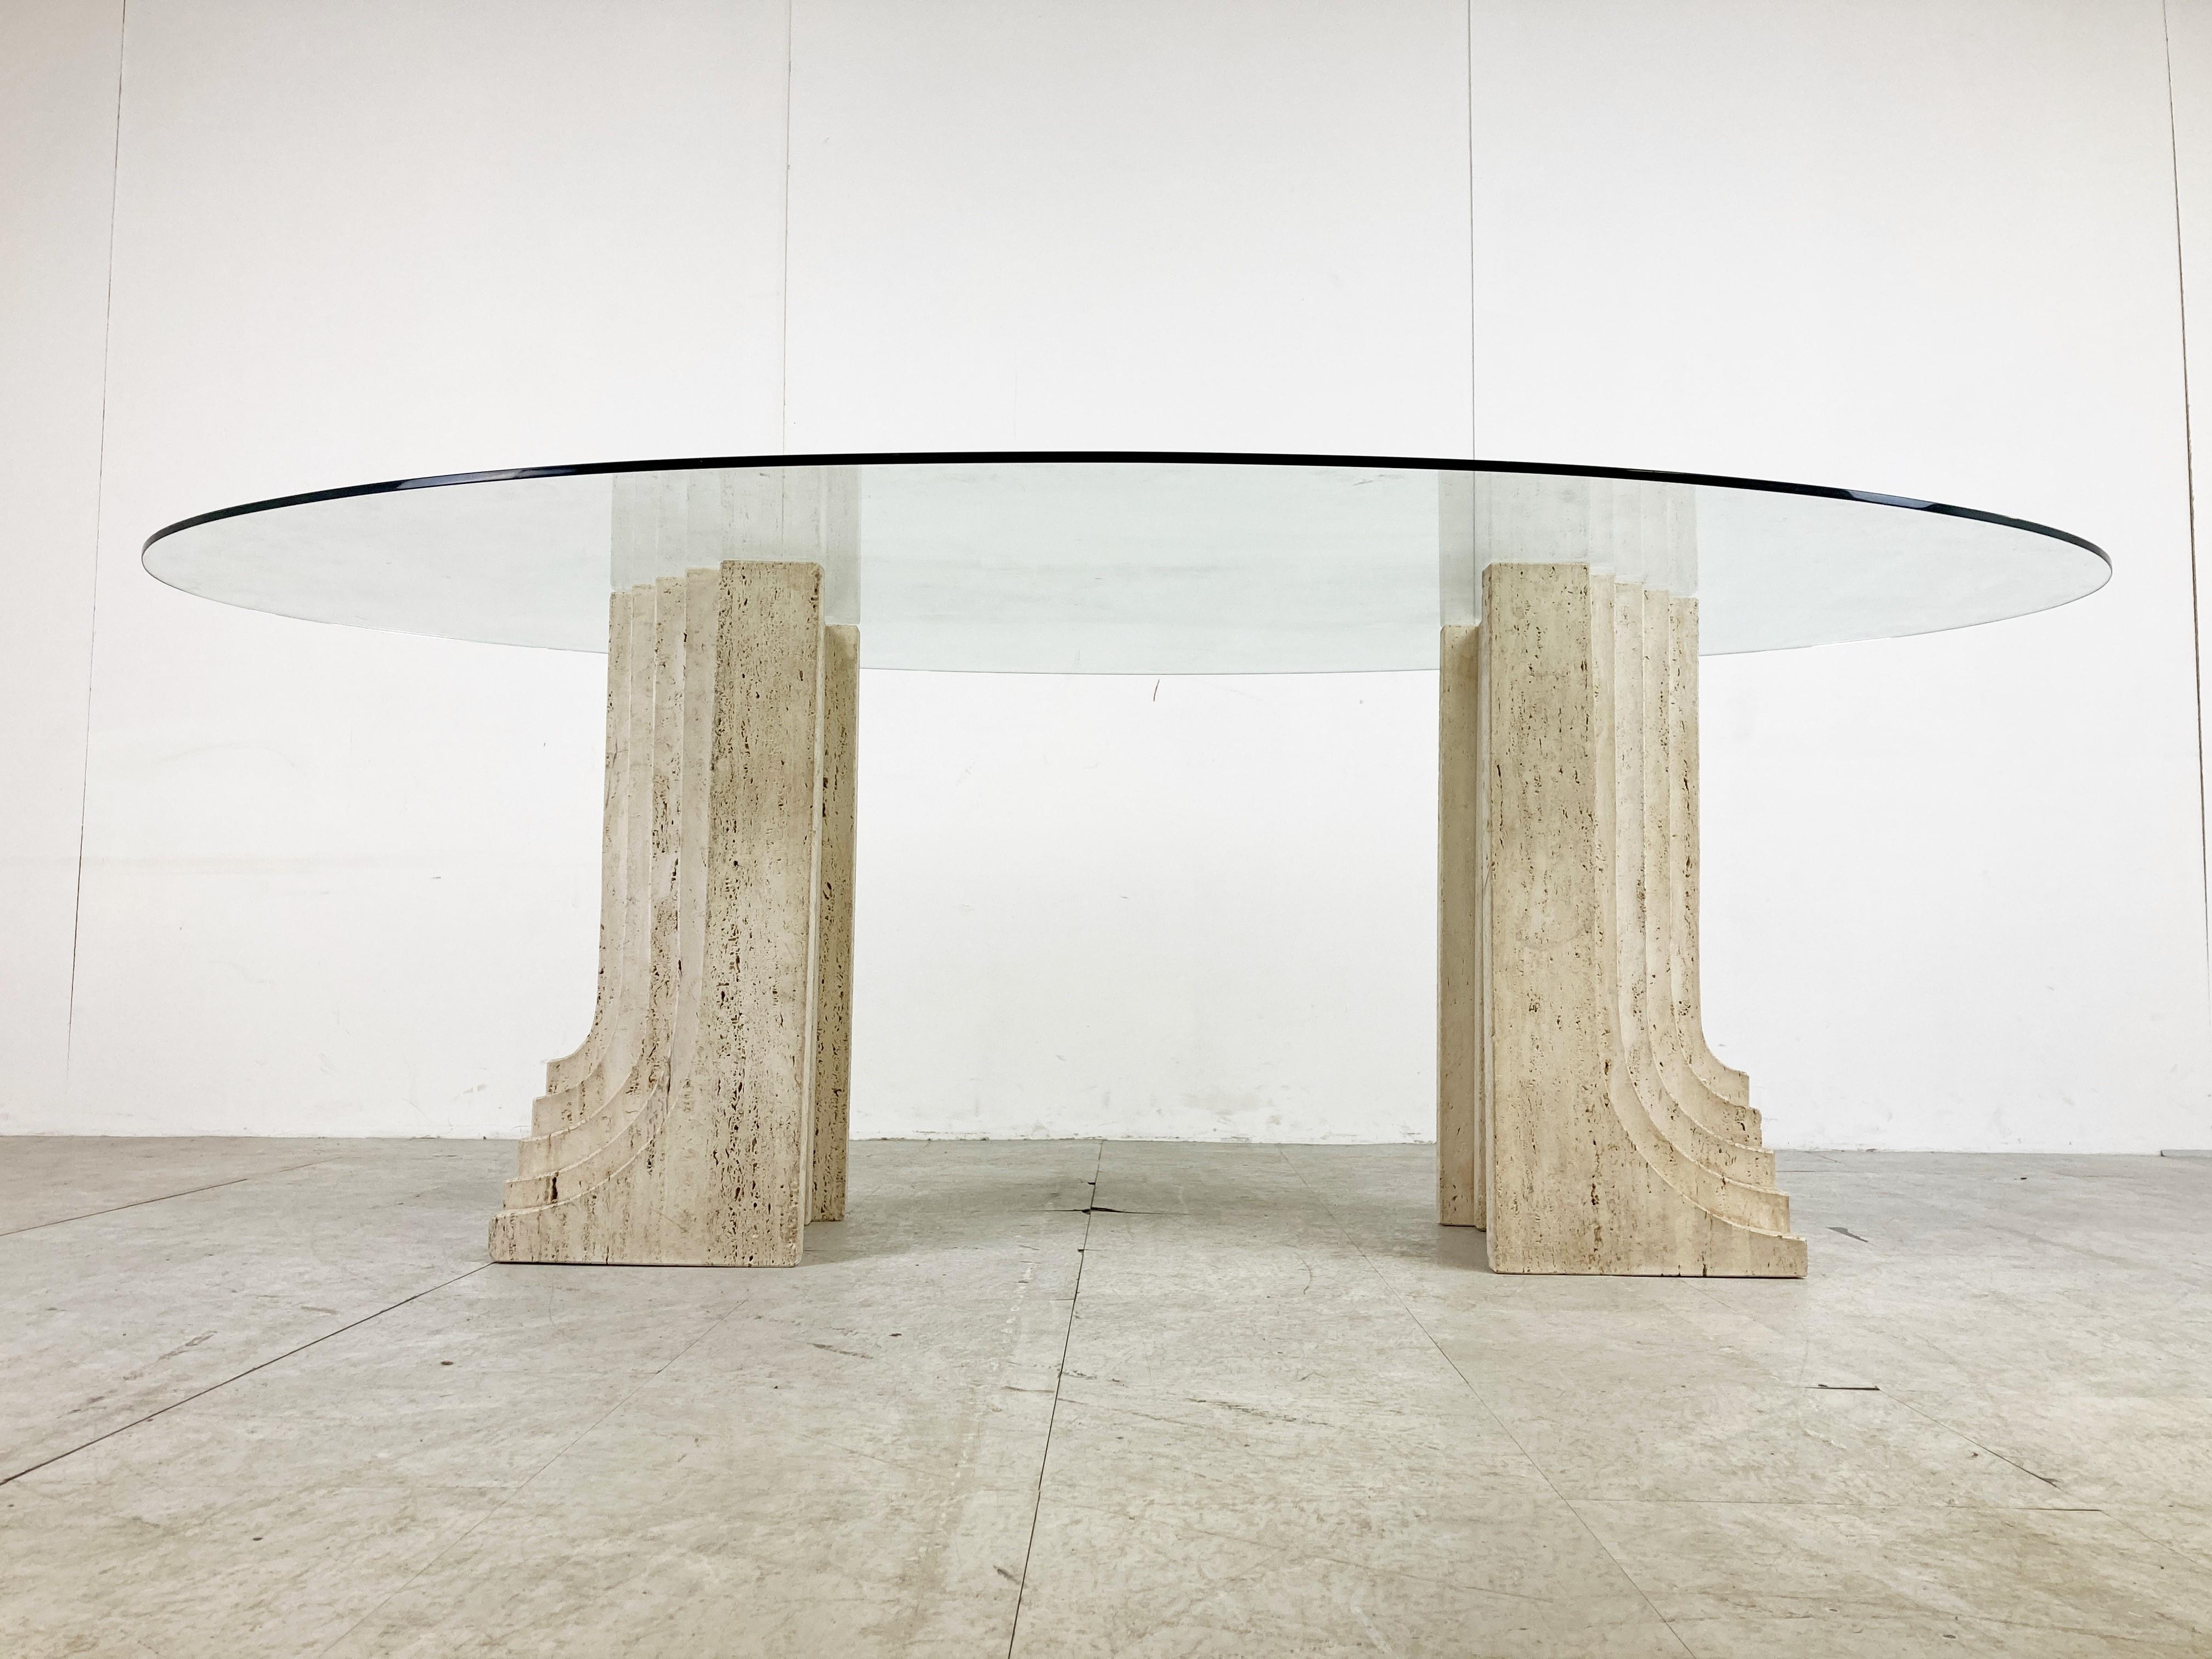 Late 20th Century Vintage travertine Carlo Scarpa style dining table, 1970s